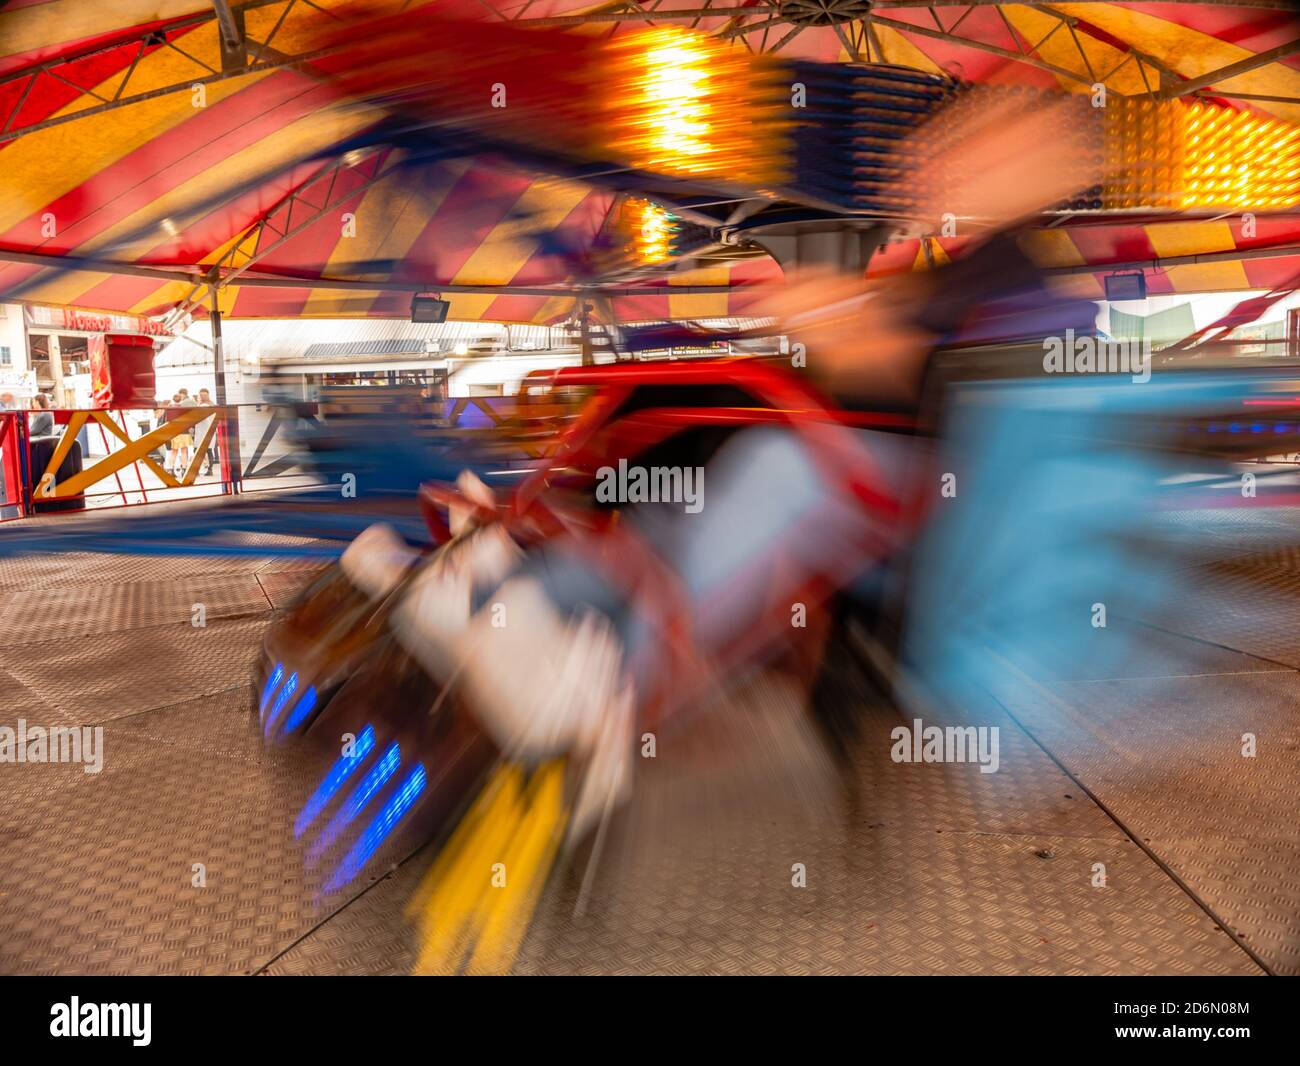 Spin cycle on a spinning waltzer in fun park Stock Photo